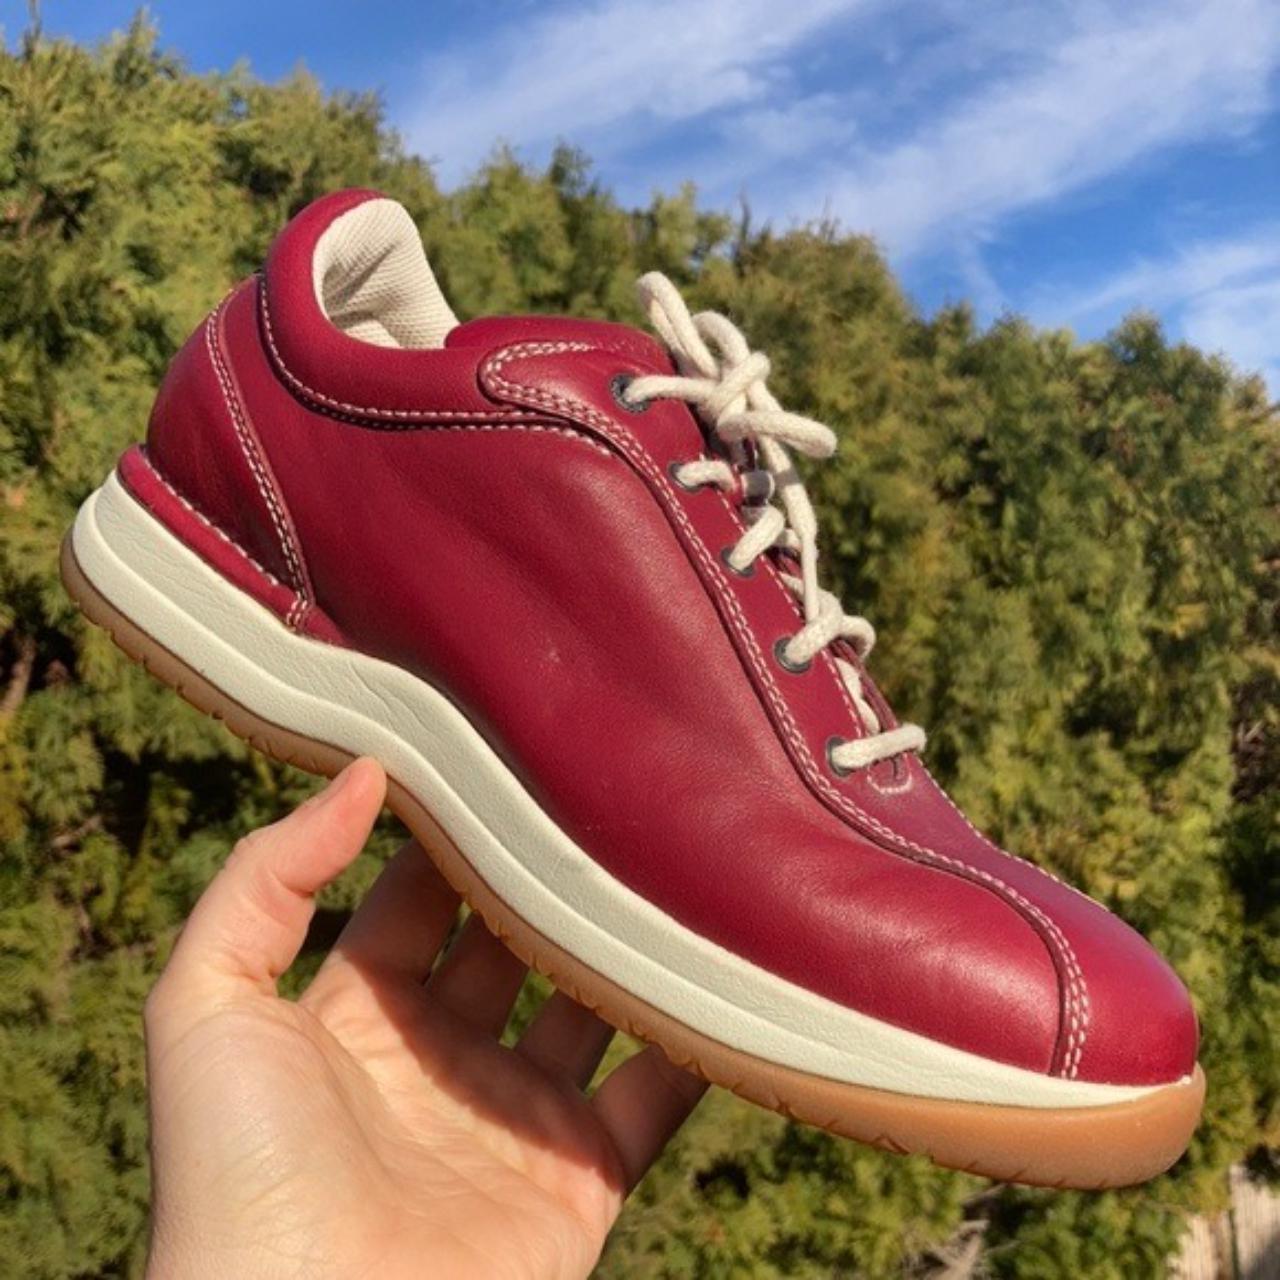 Product Image 1 - Rockport Red Leather Women’s Sneaker